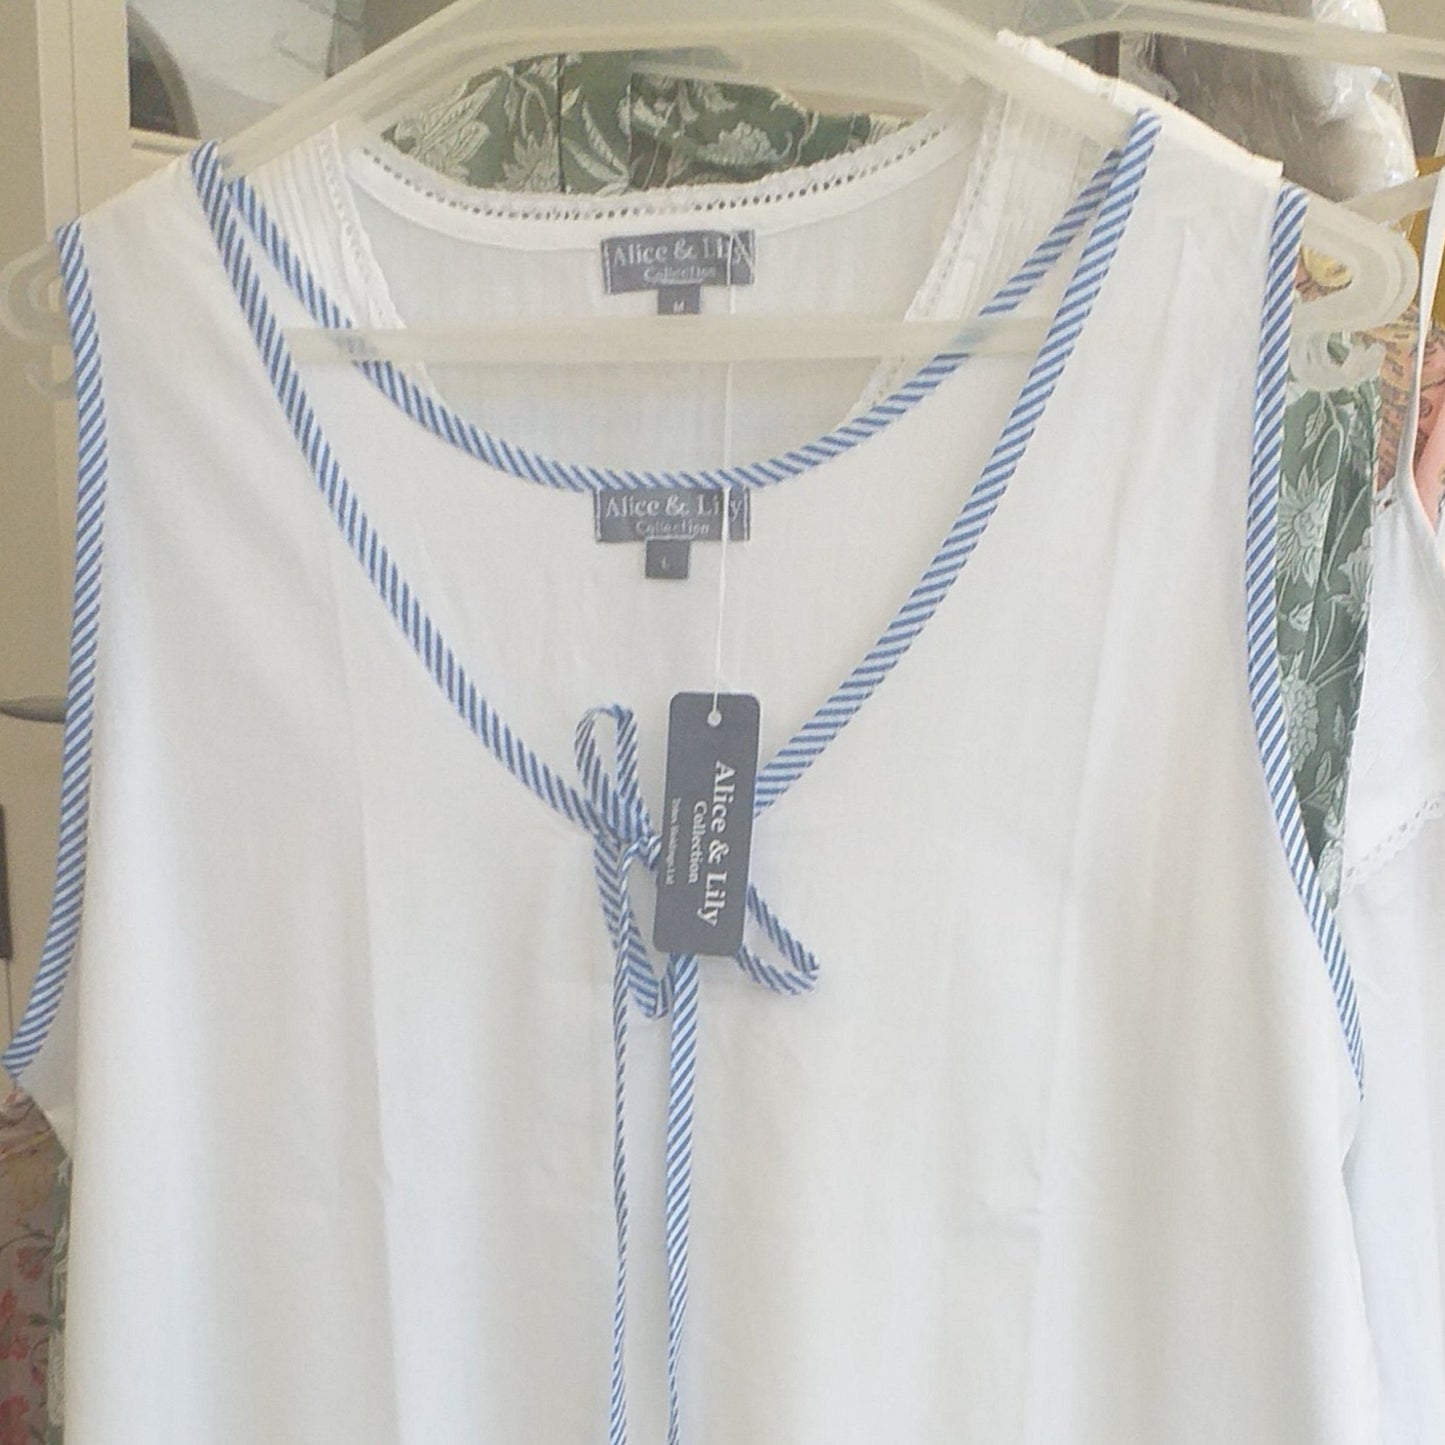 White cotton nighty with blue and white striped trim